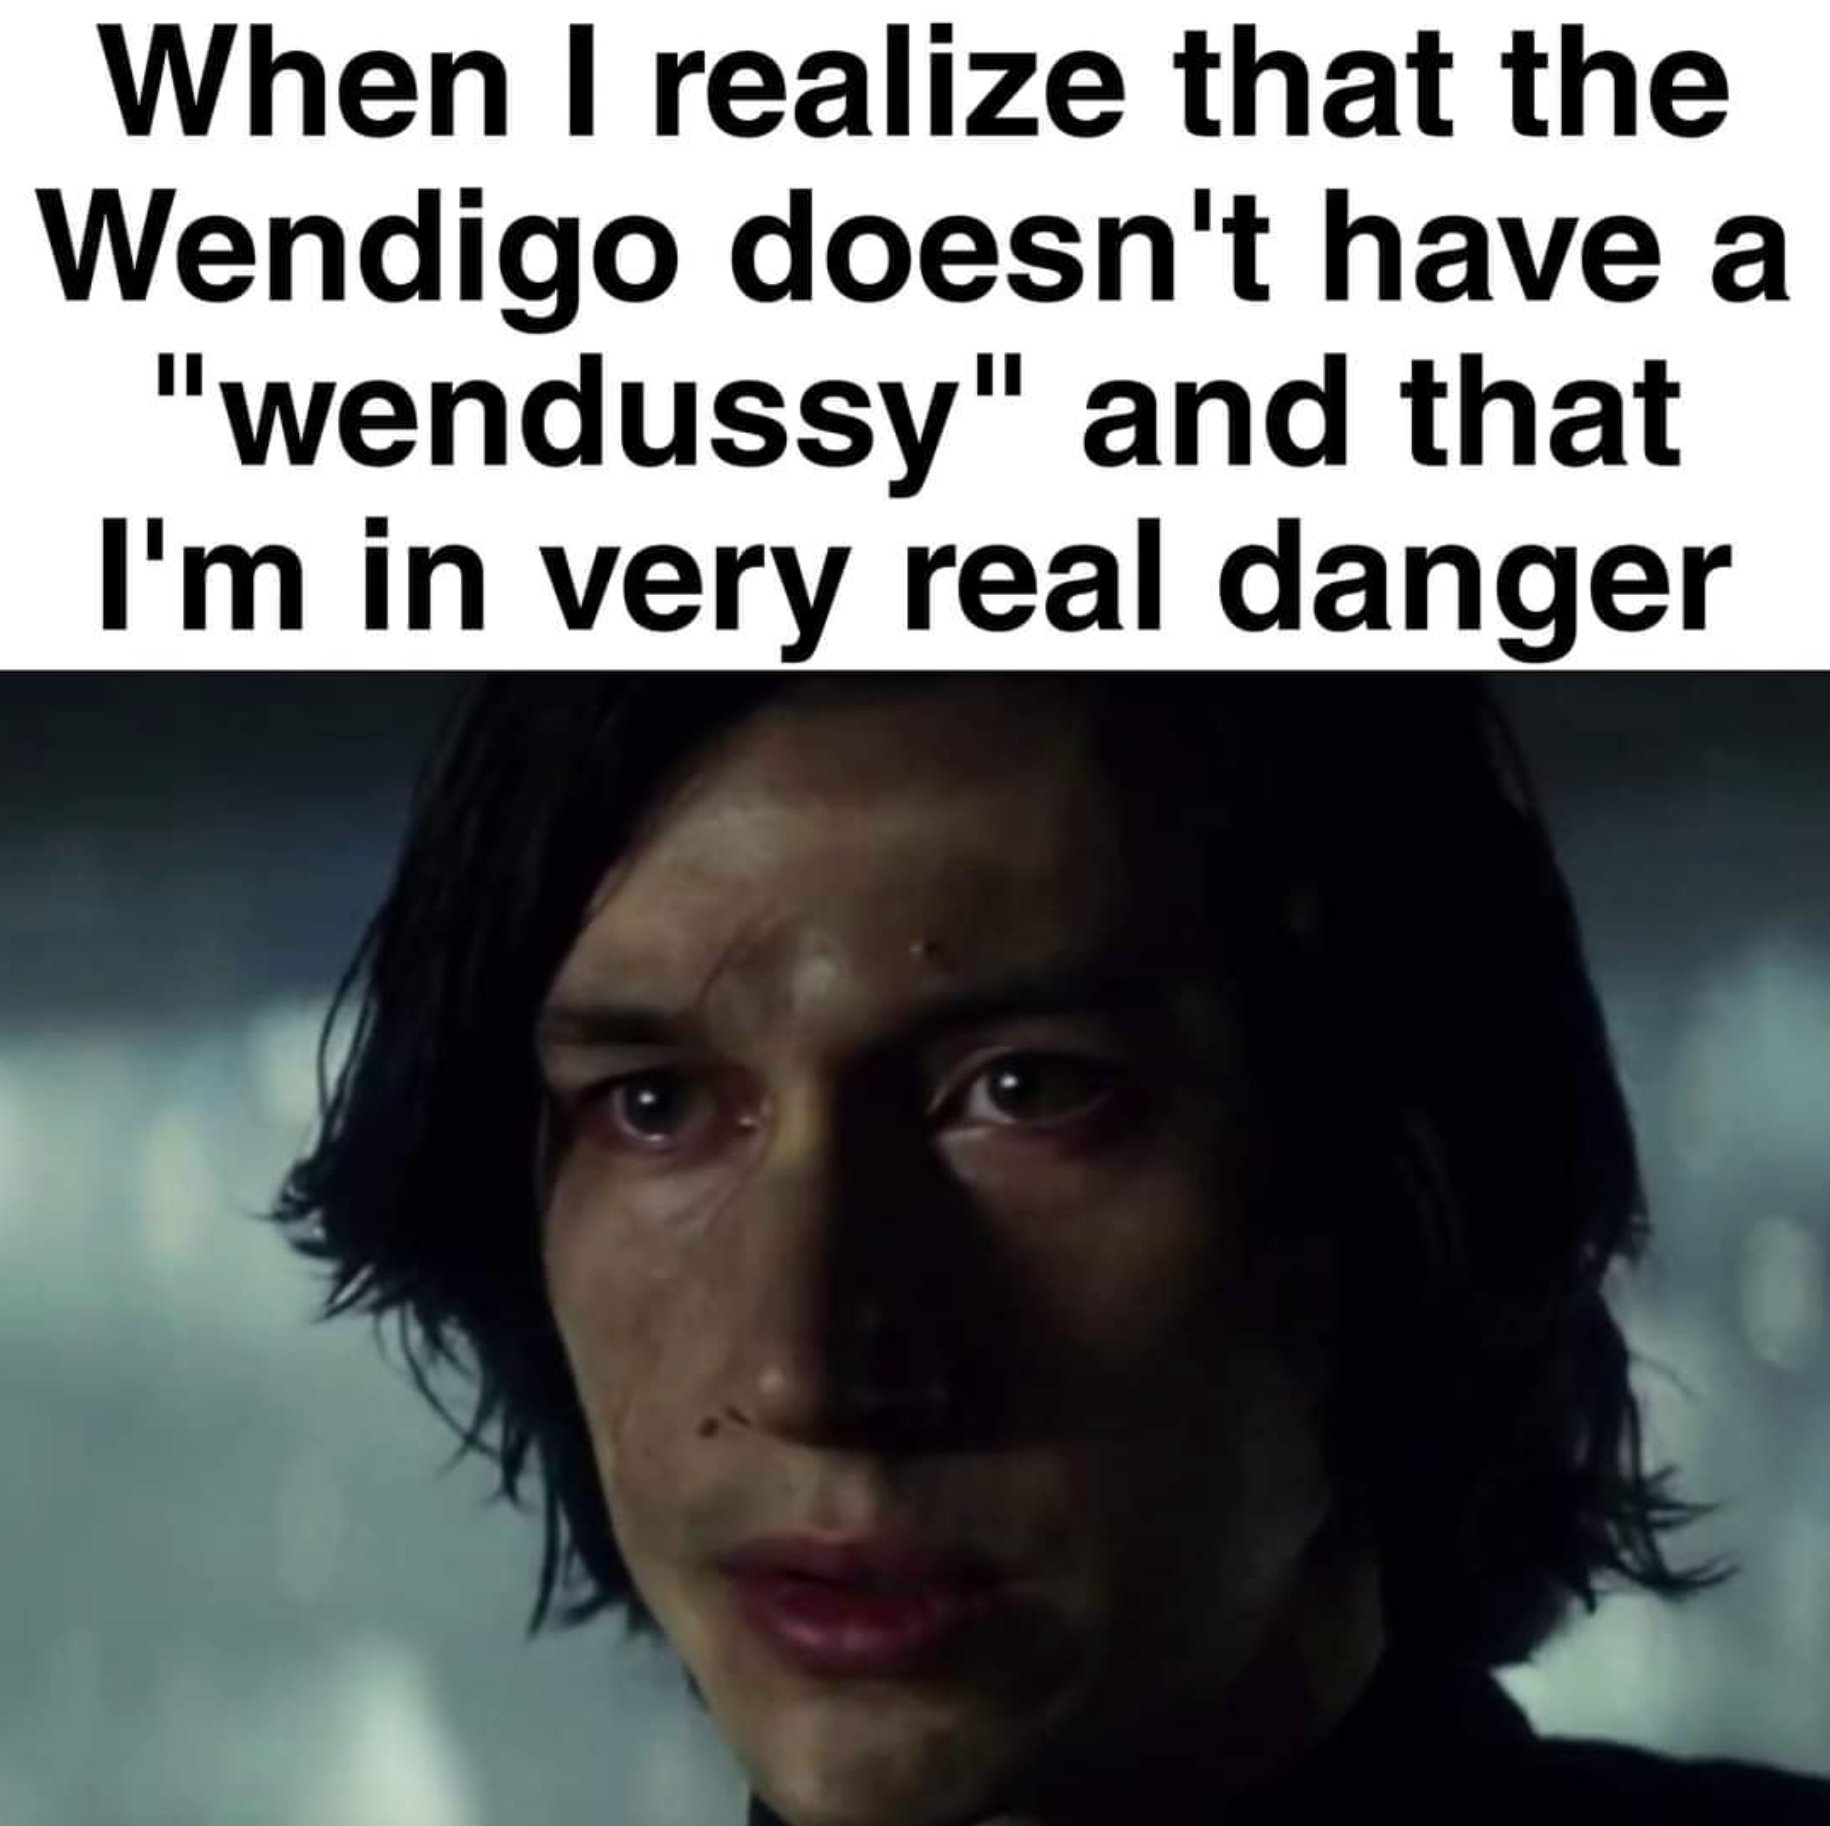 dank  memes - wendussy meme - When I realize that the Wendigo doesn't have a "wendussy" and that I'm in very real danger